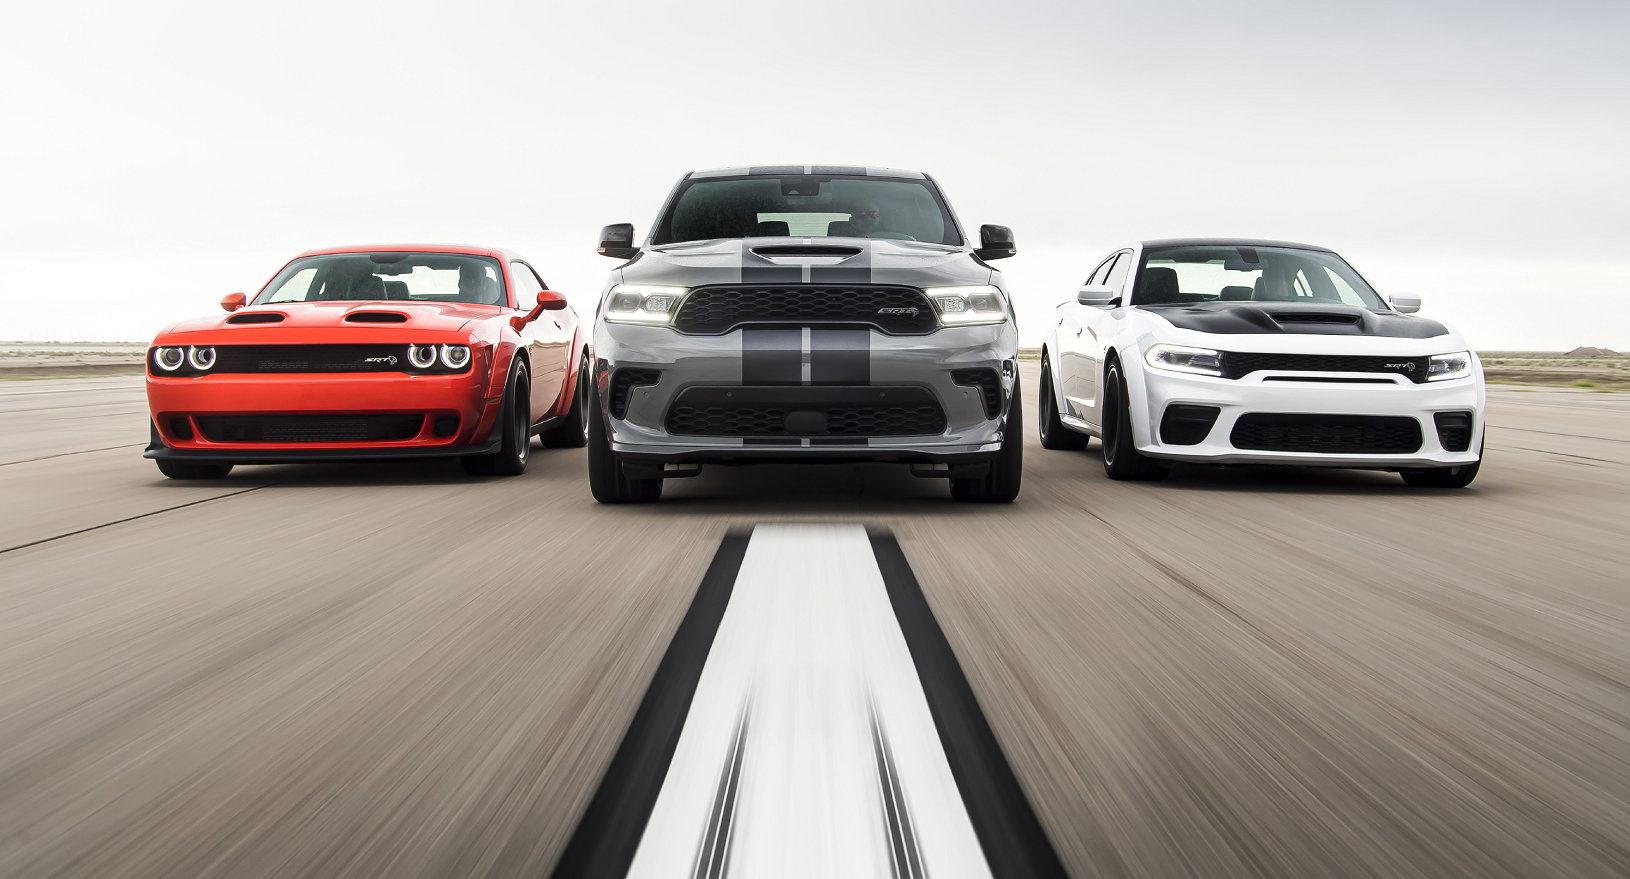 Meet The New Members of the Dodge Family